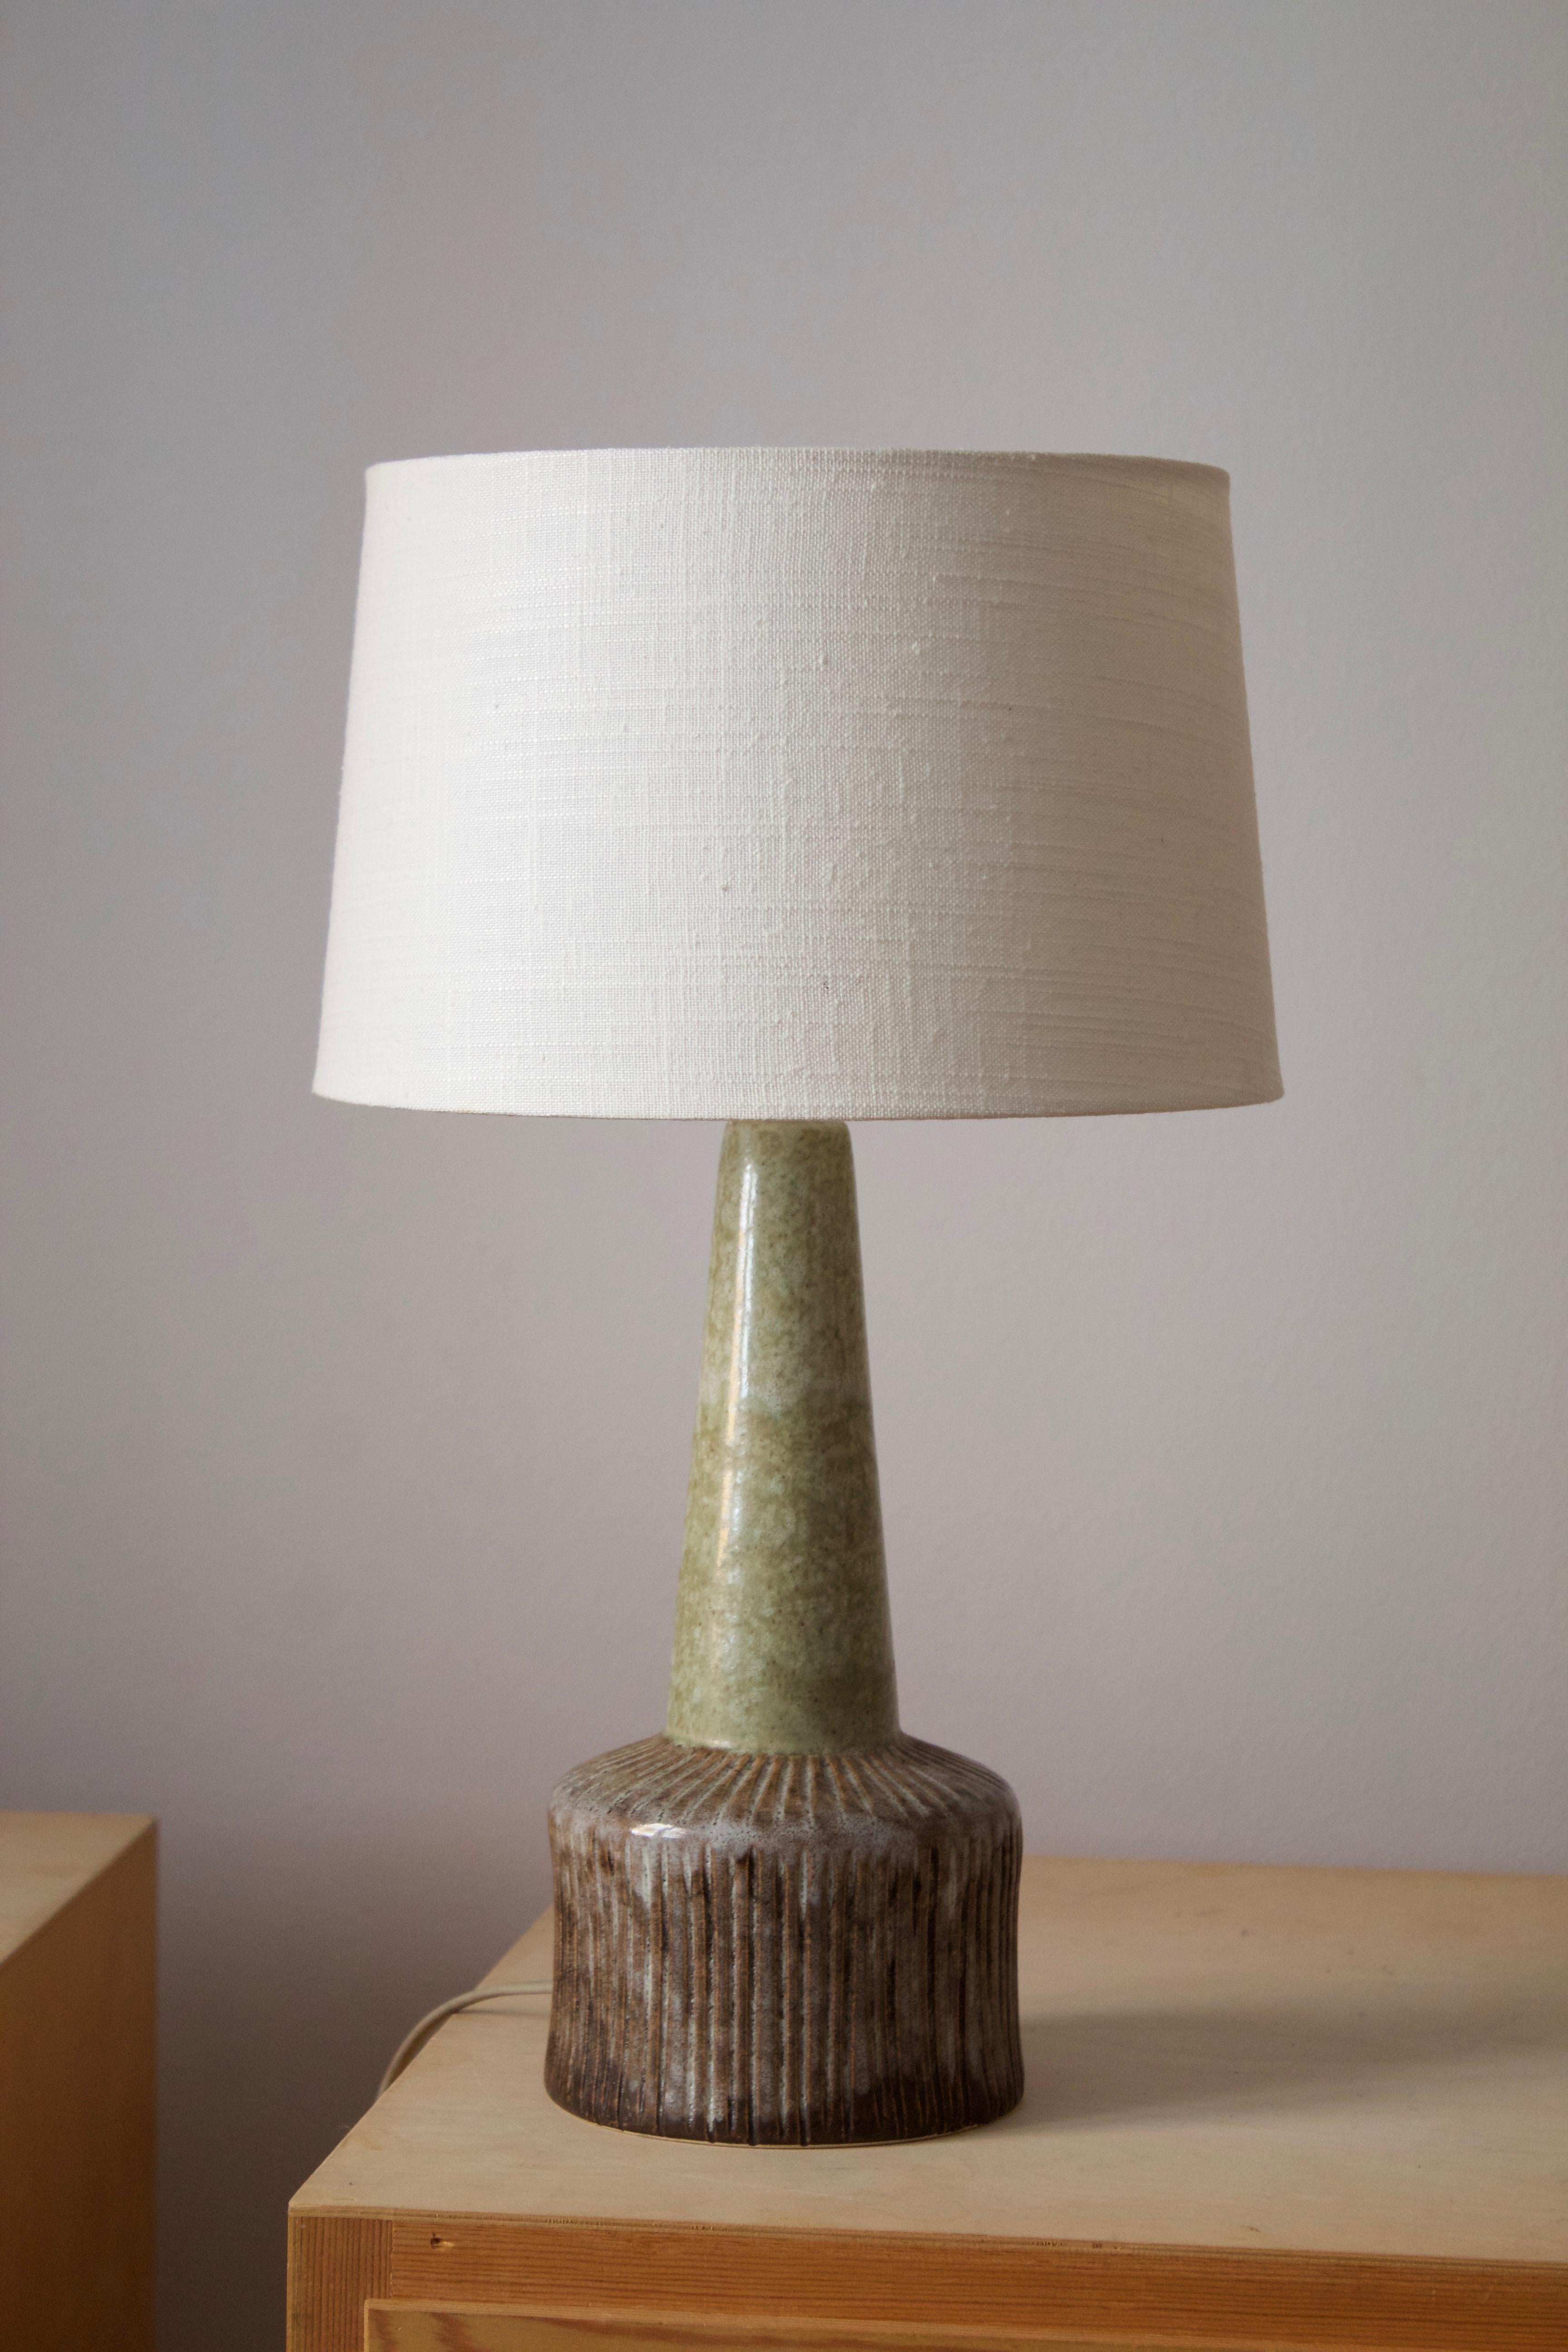 A small table lamp. Signed. Designed and produced in Denmark, 1960s. Unidentified designer and maker. Brand new high-end linen lampshade.

Sold without lampshade, stated dimensions excludes lampshade. 

Glaze features brown-green colors.

Other